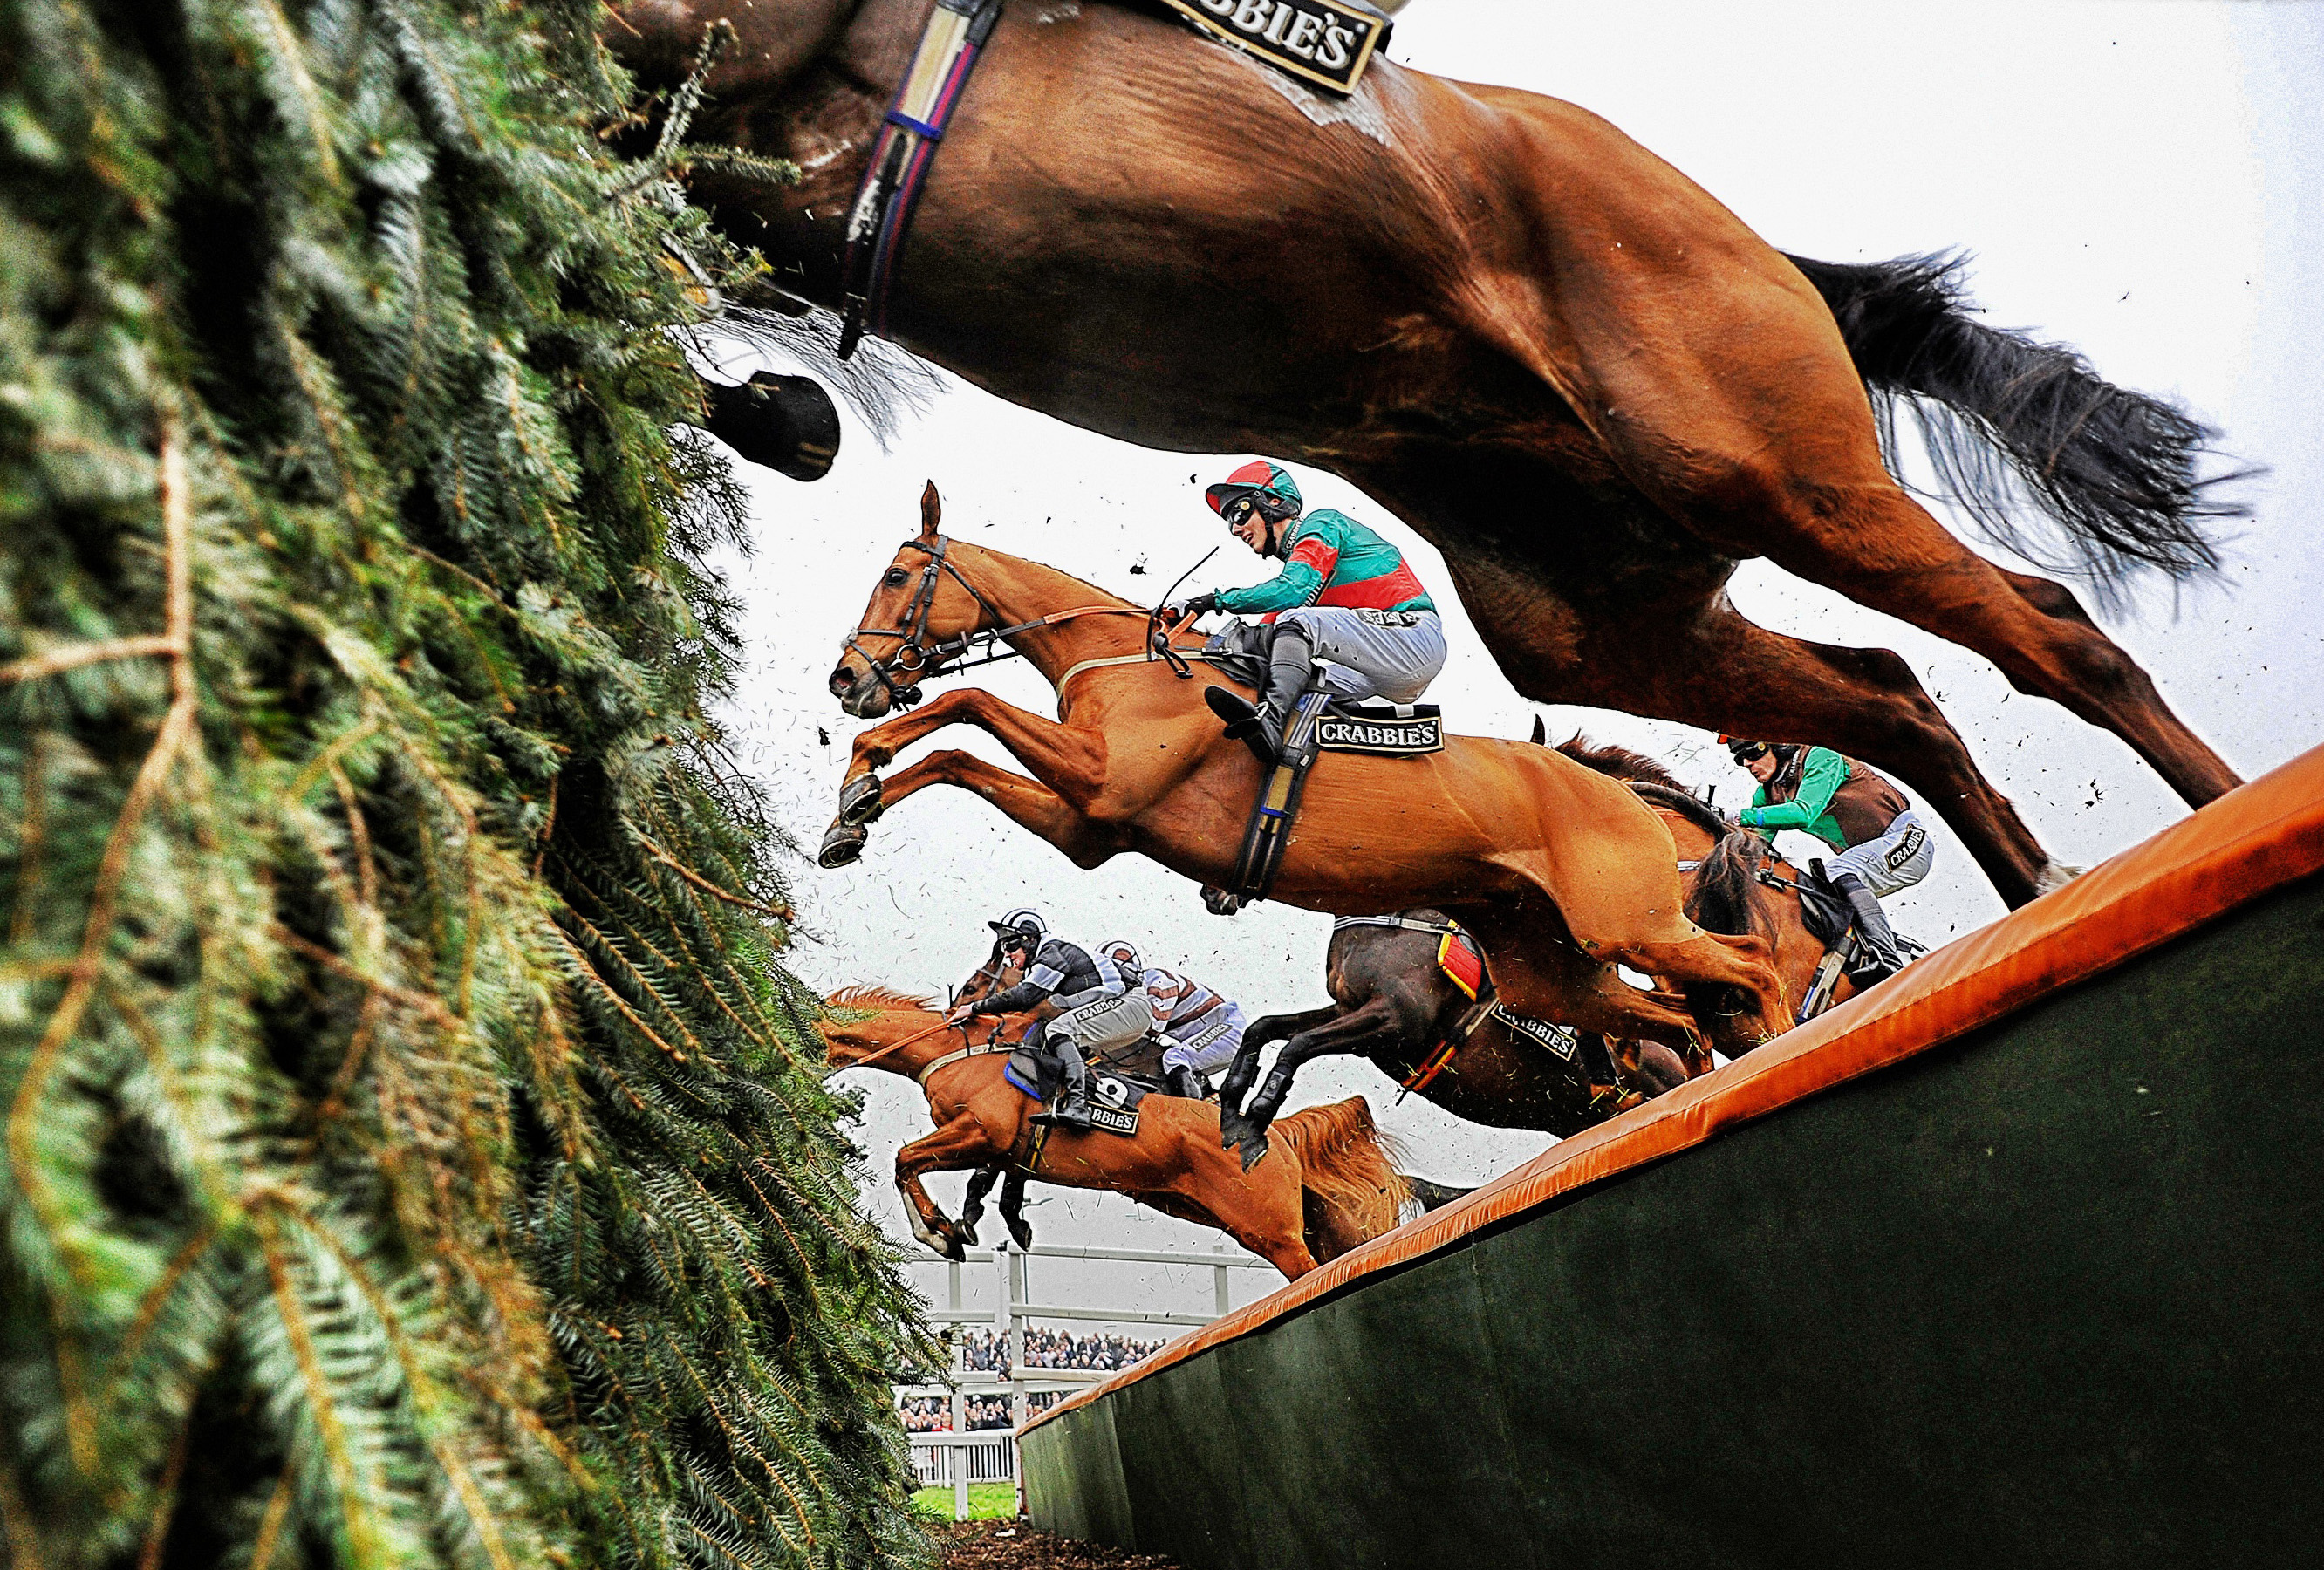 The Grand National is held at Aintree Racecourse in Liverpool 